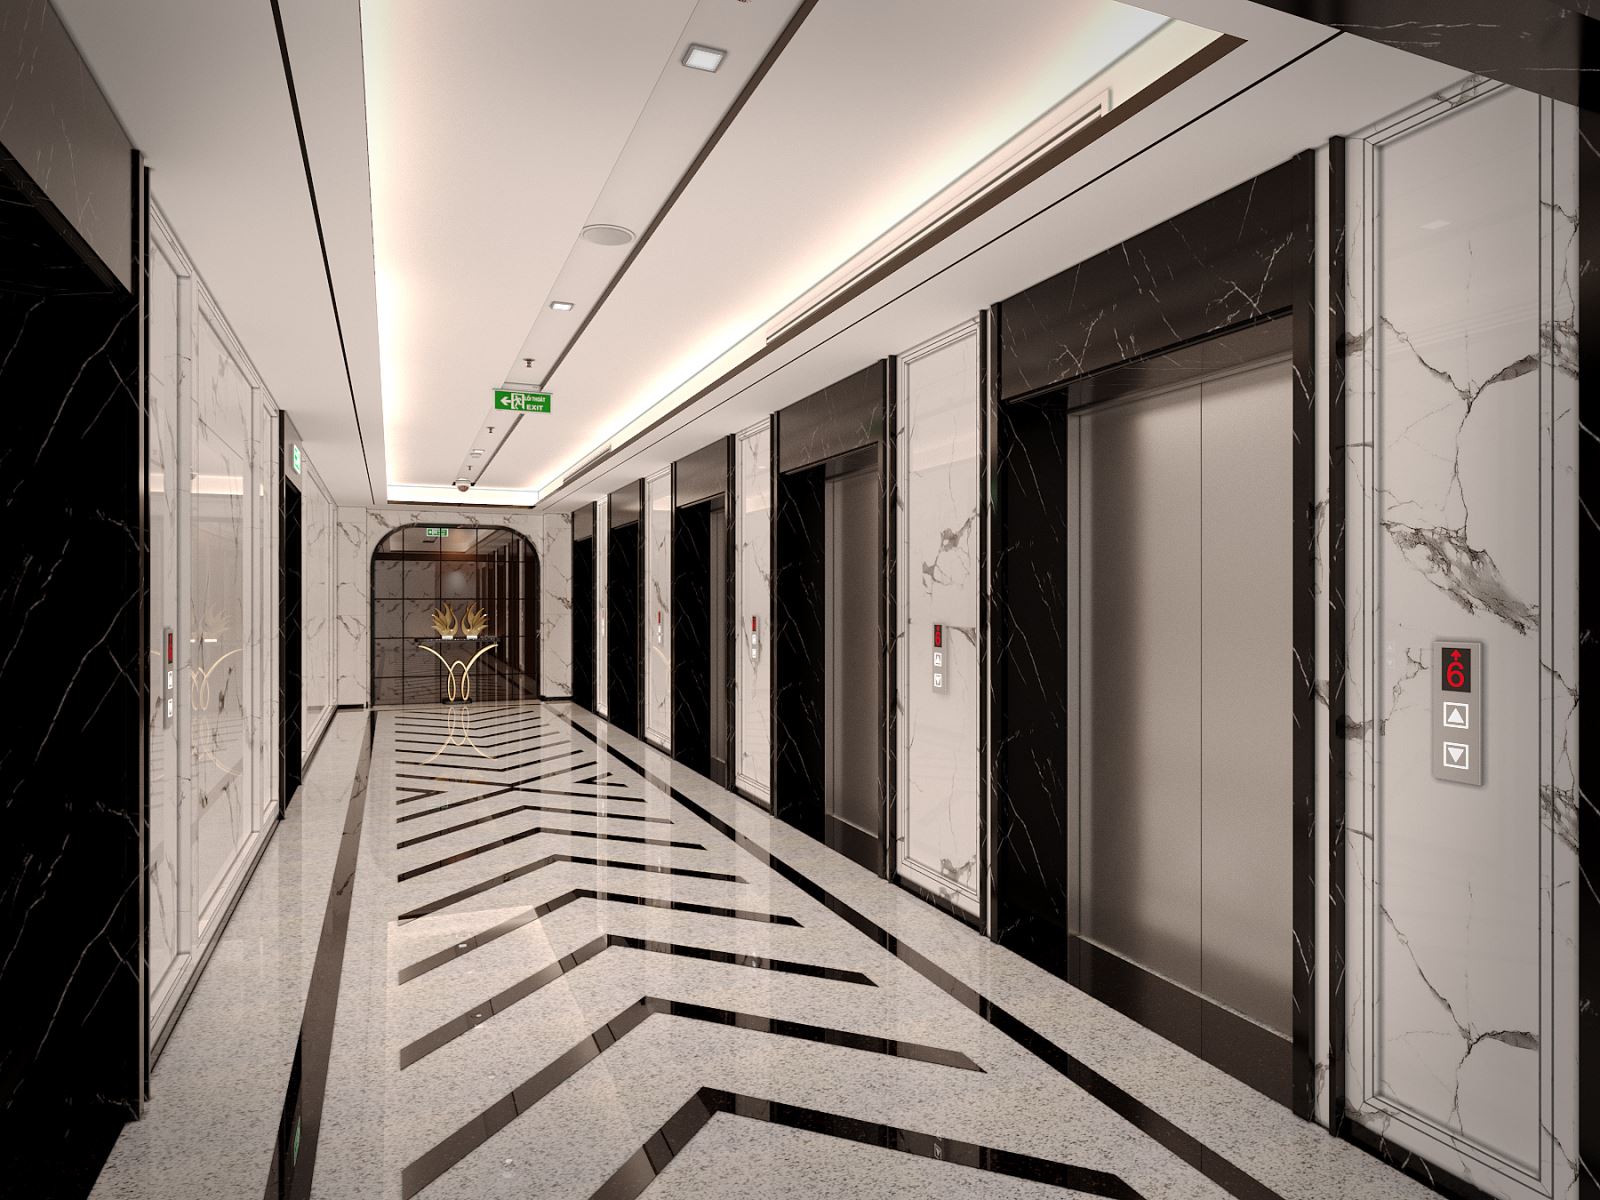 King Palace owns seven smart elevators, reaching speeds of up to four metres per second.